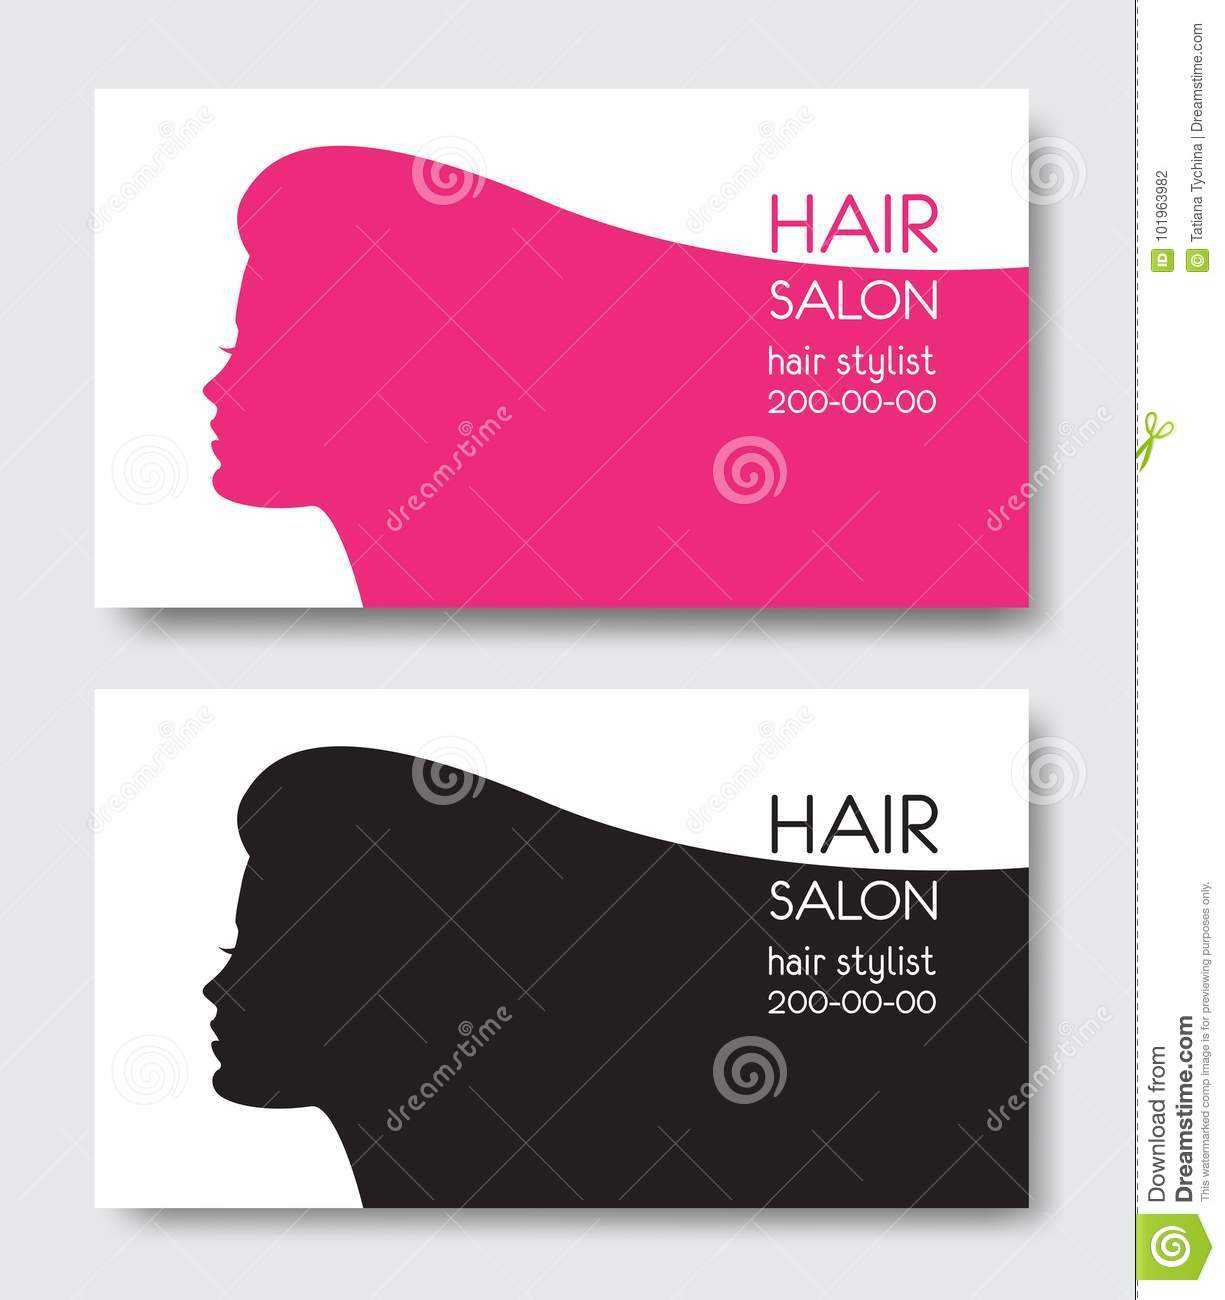 Hair Salon Business Card Templates With Beautiful Woman Face Intended For Hairdresser Business Card Templates Free